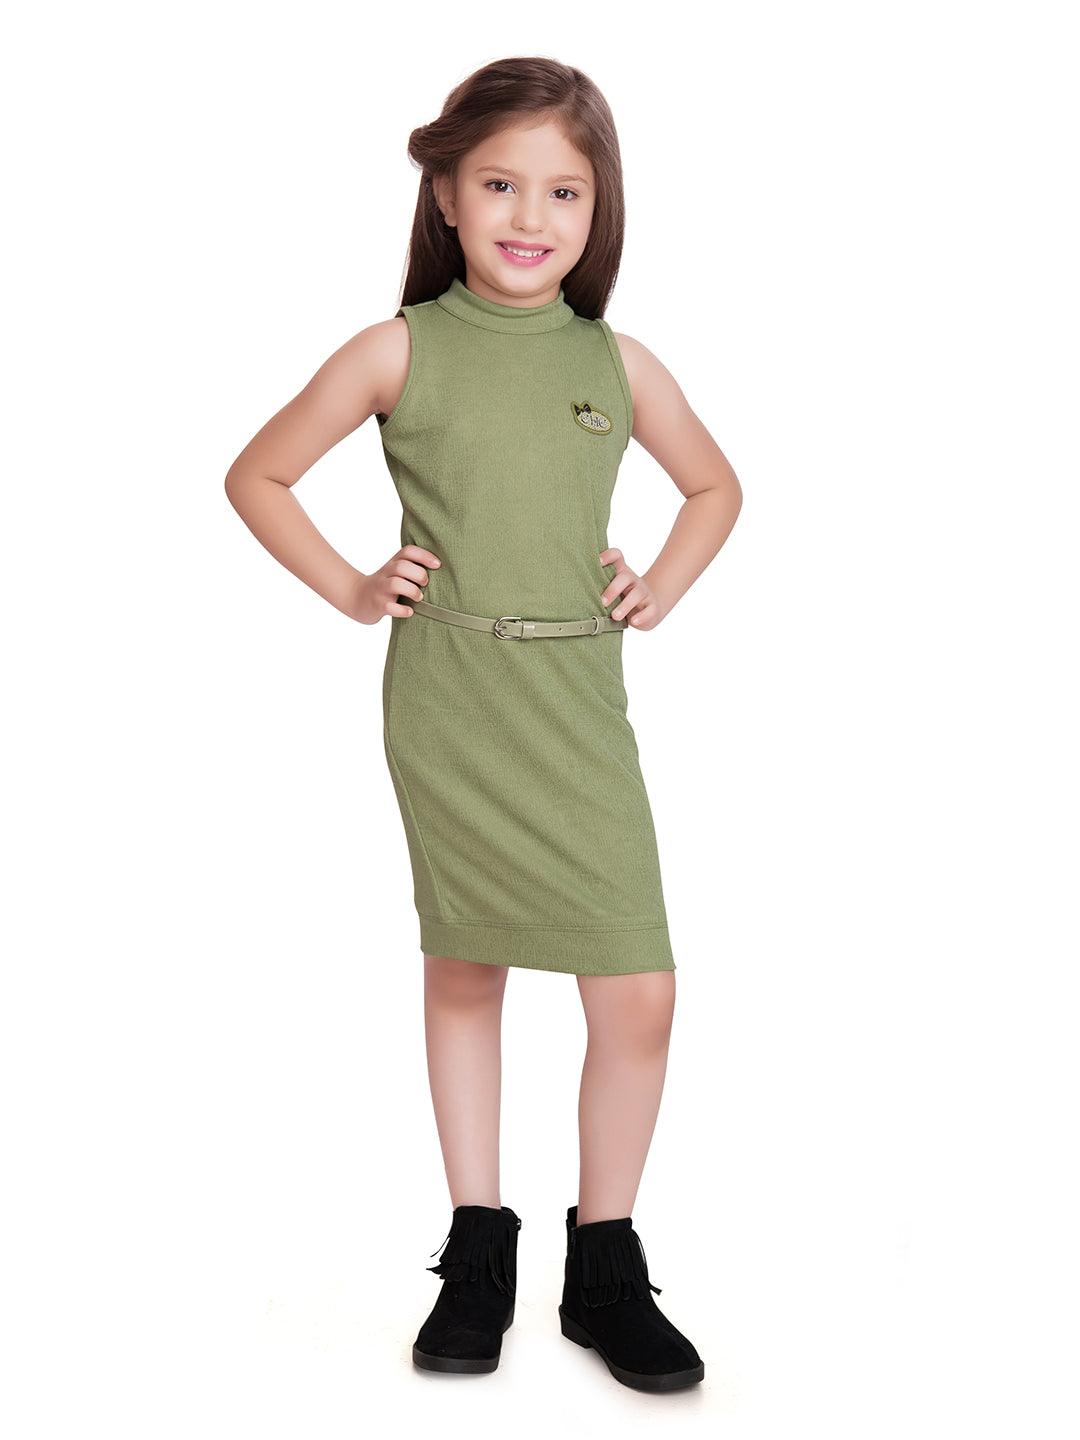 Green Coloured Dress - 2030 Green - TINY BABY INDIA shop.tinybaby.in